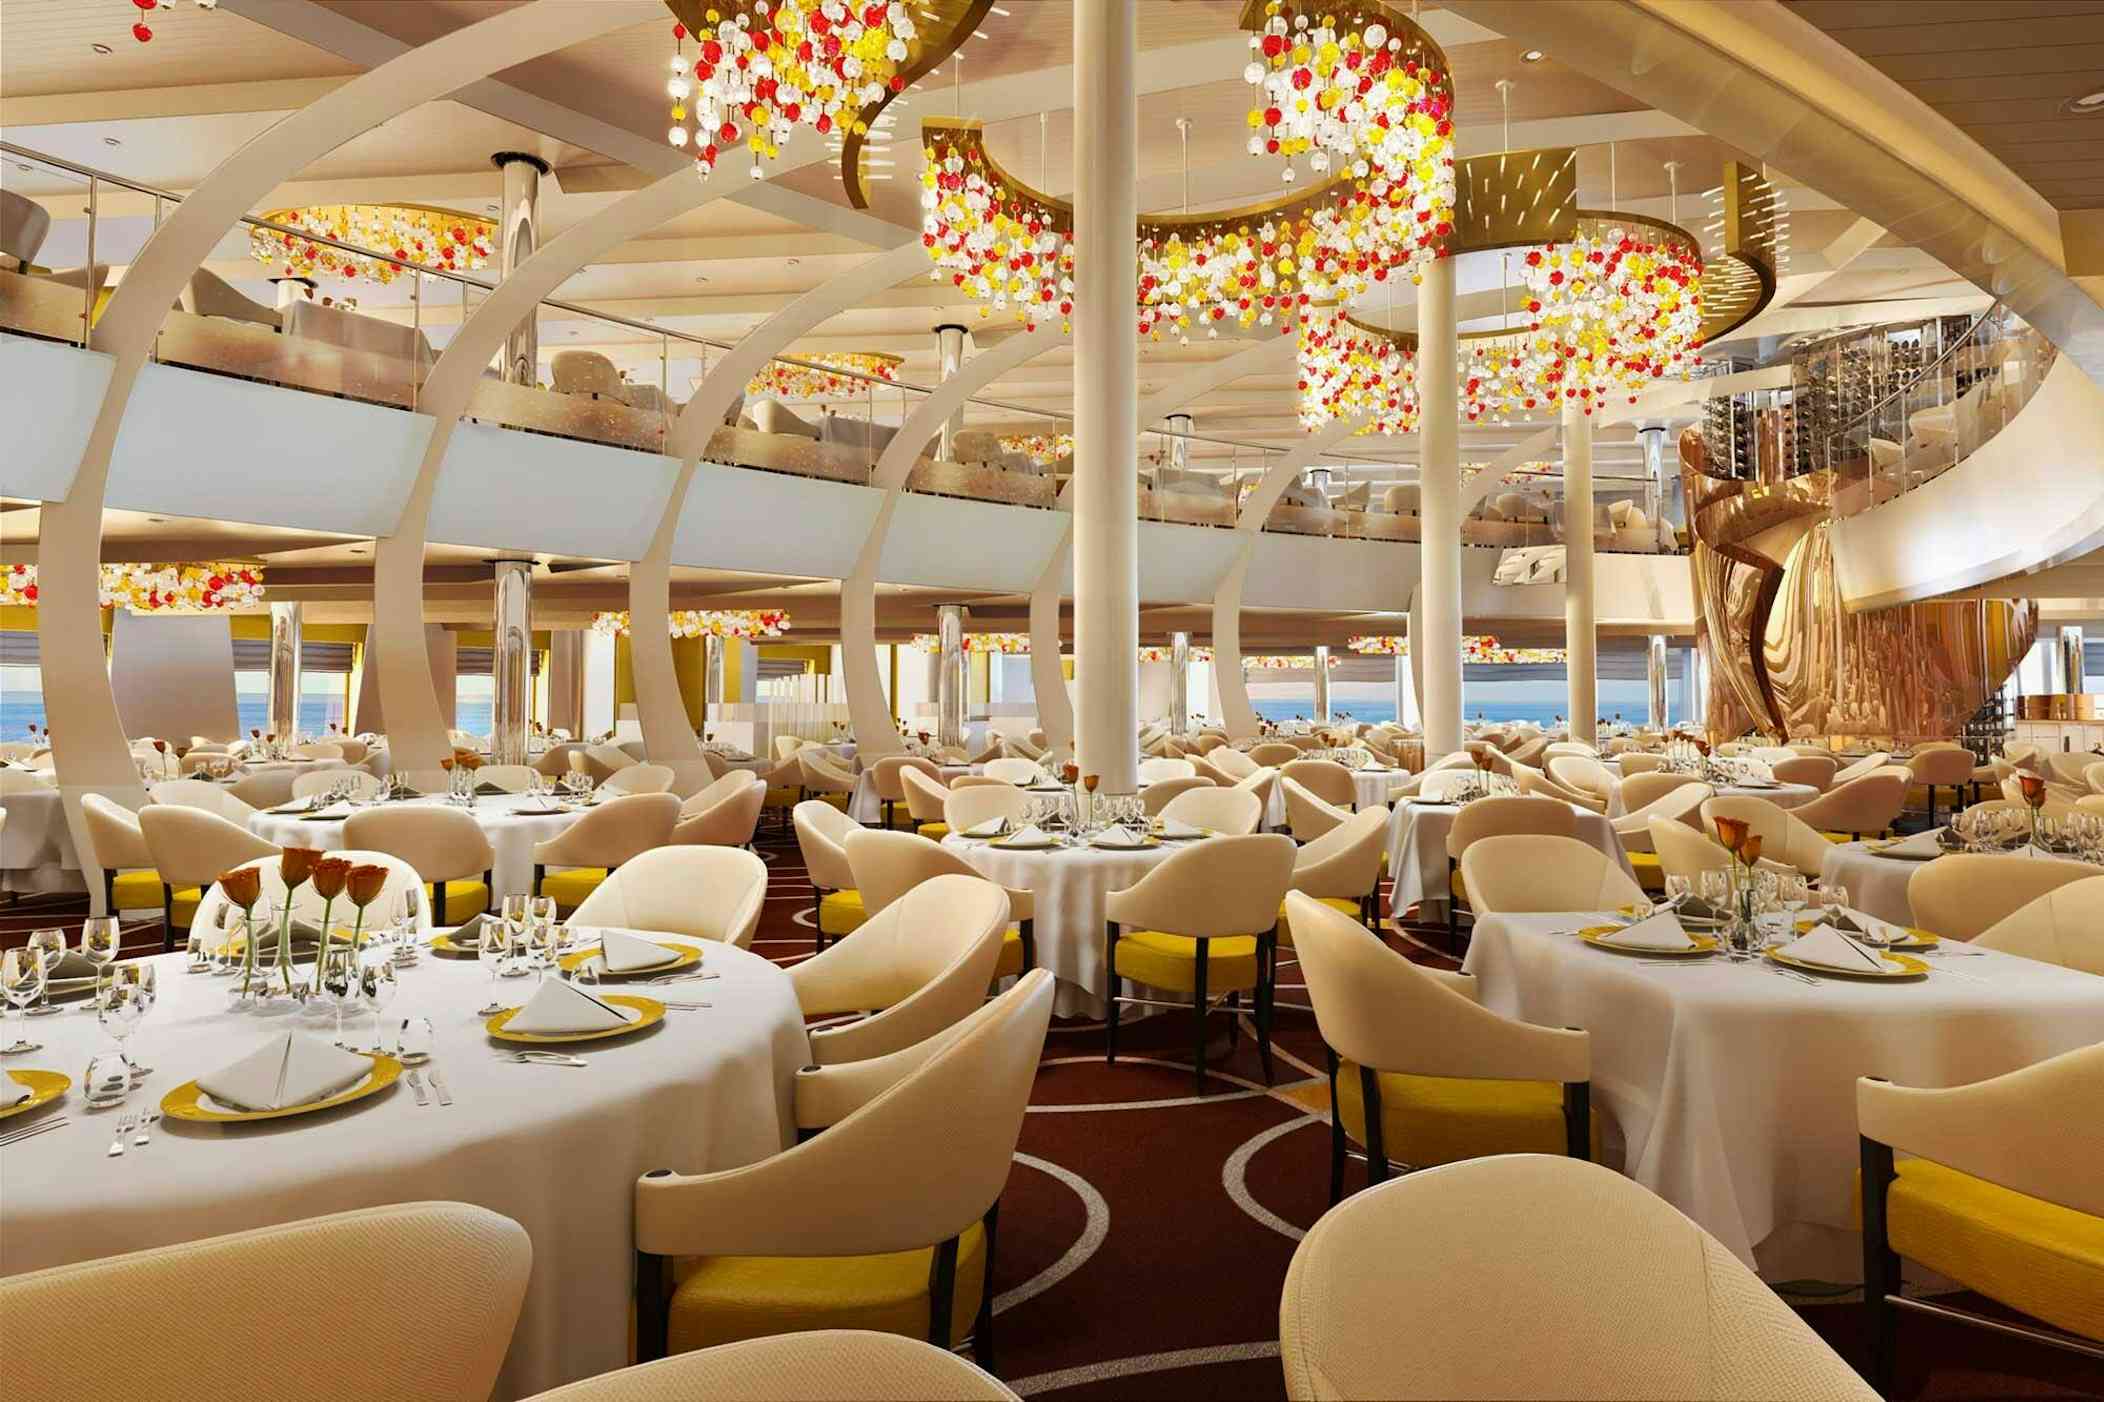 12 Etiquette Rules for Cruise Ship Dining Rooms – All Things Cruise